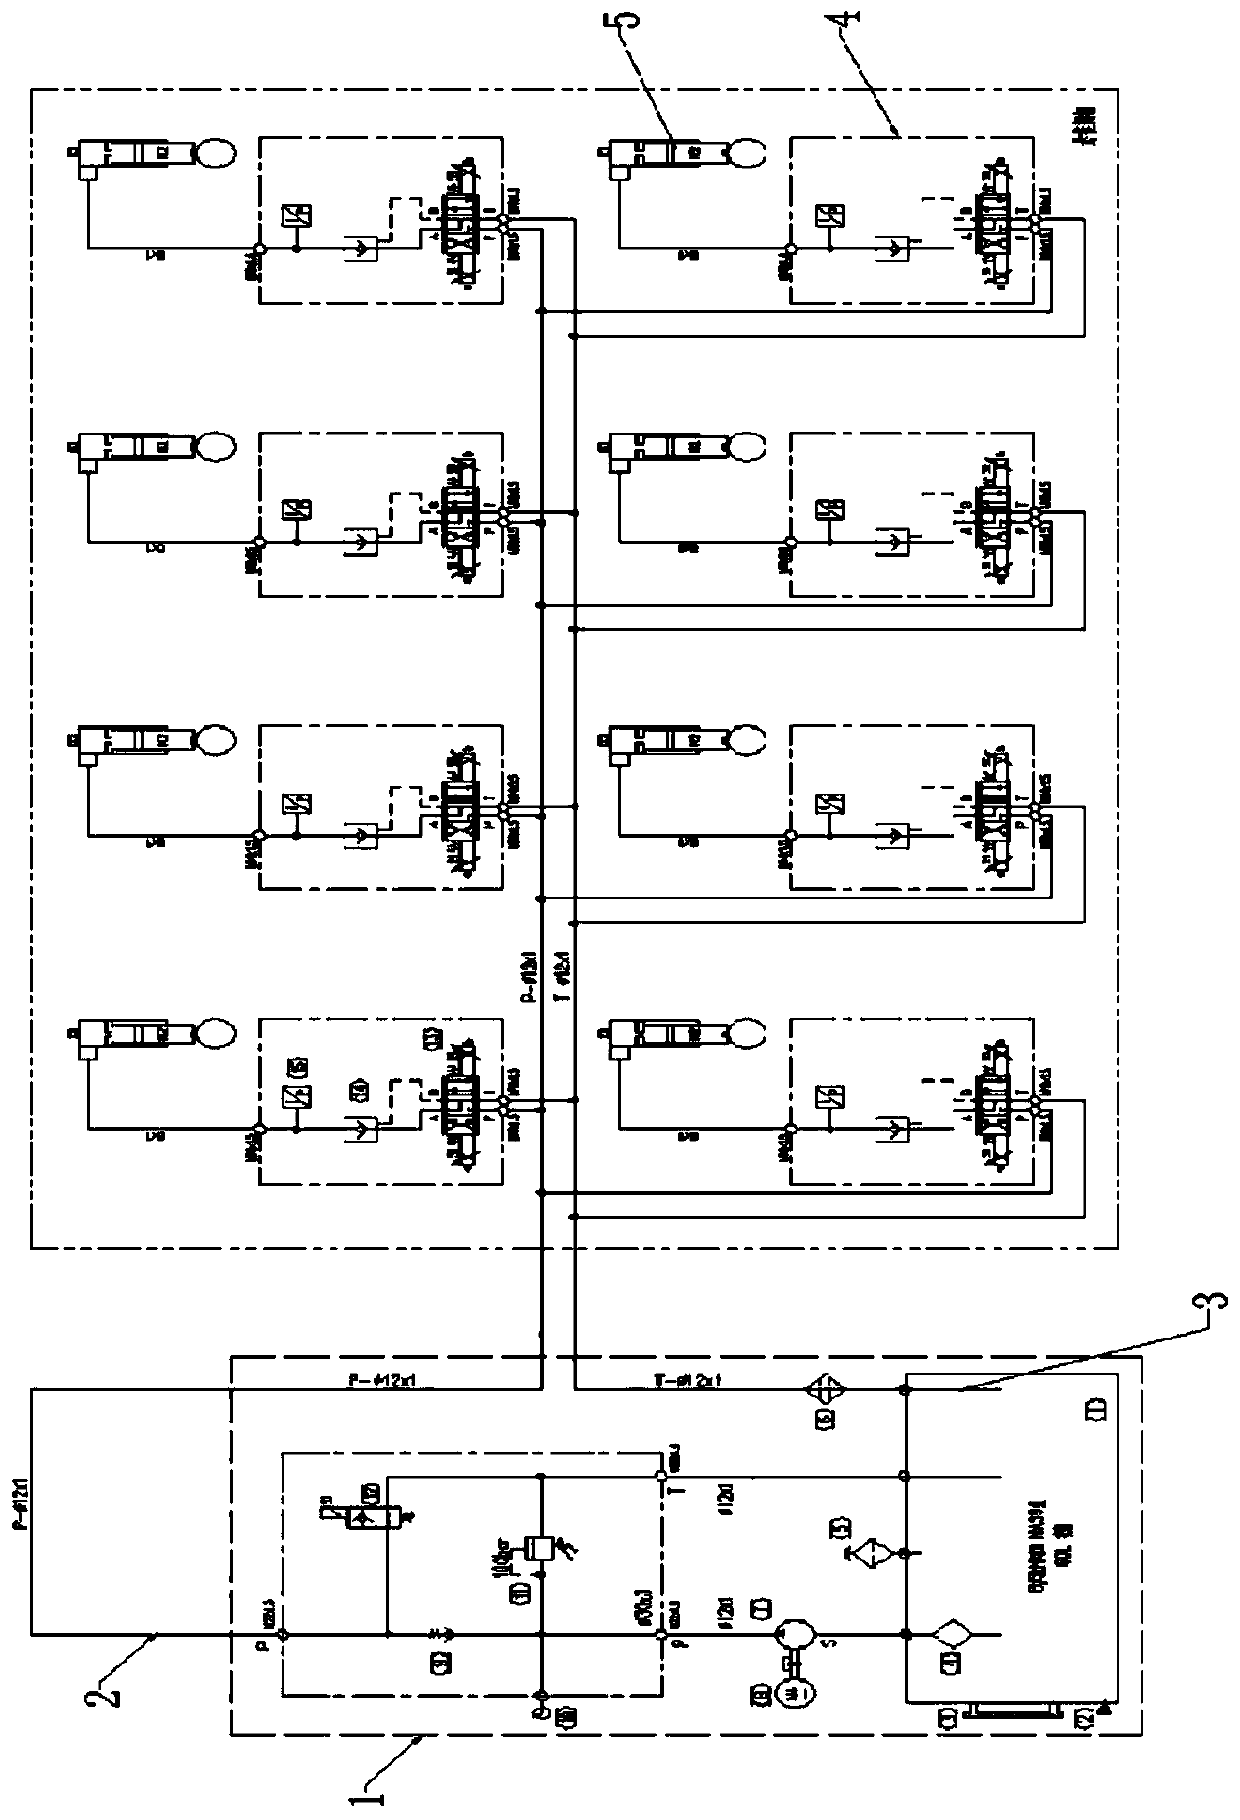 Hydraulic control system for synchronously lifting and lowering oil-gas suspension oil cylinders